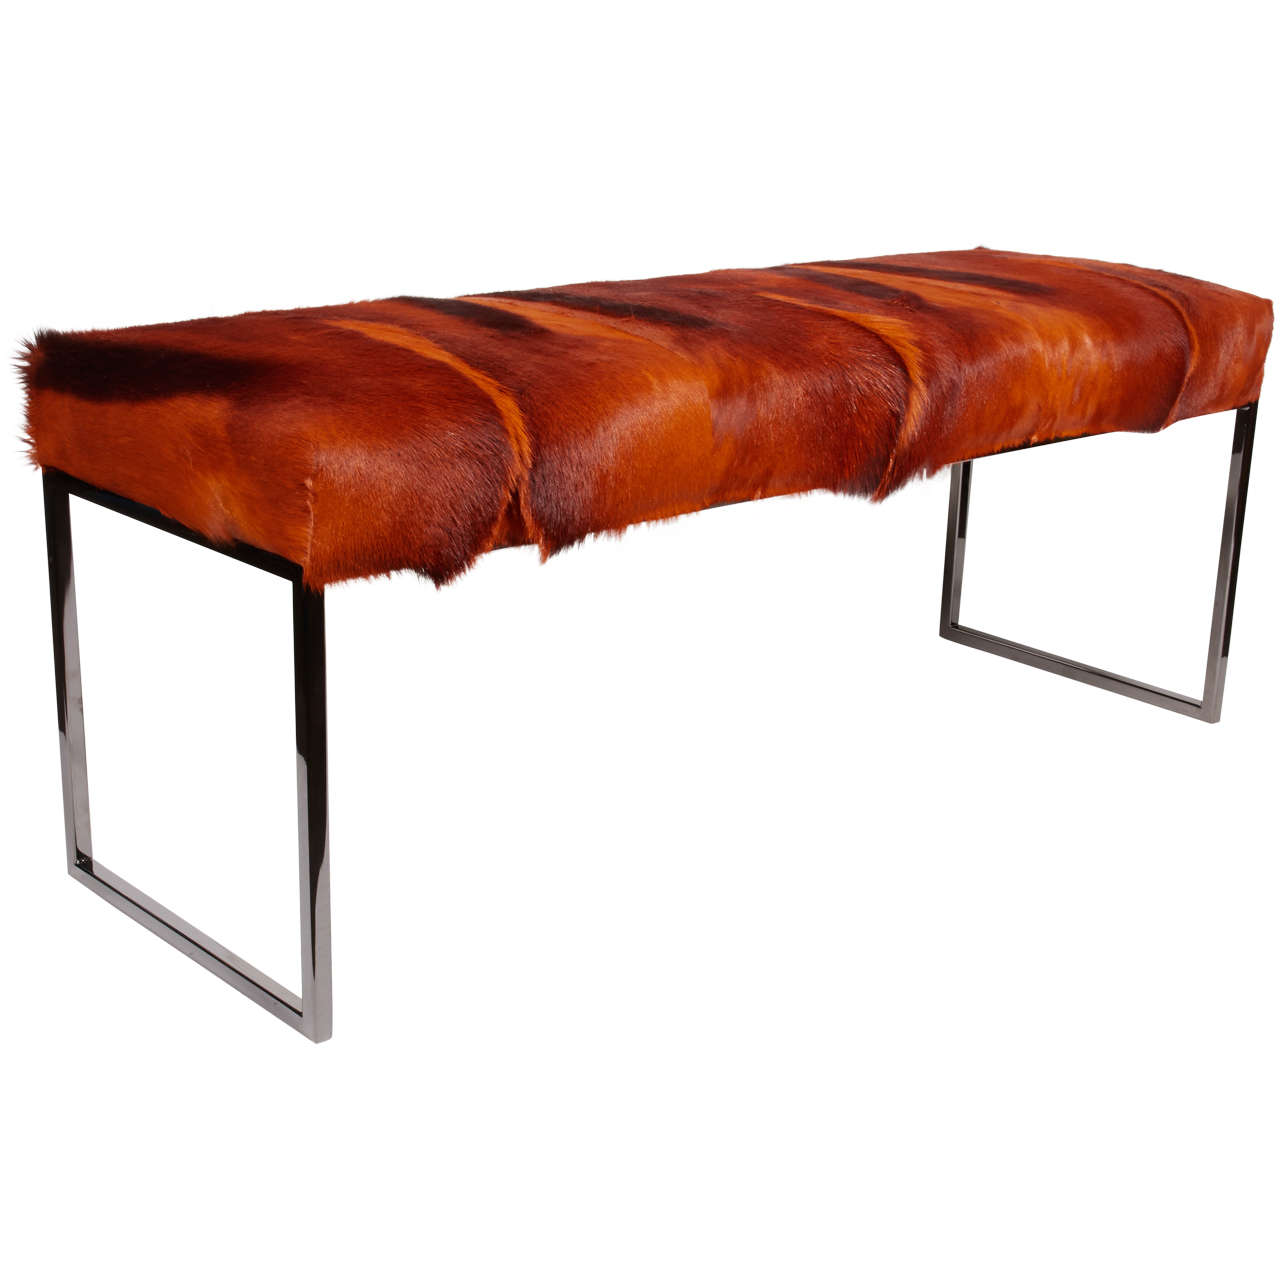 Exotic African springbok bench in hues of burnt orange, burnt umber. Mid-century modern style design with streamline base in black chrome. Hand-dyed and comprised of several hides featuring multiple spine details. Excellent accent piece for any room.